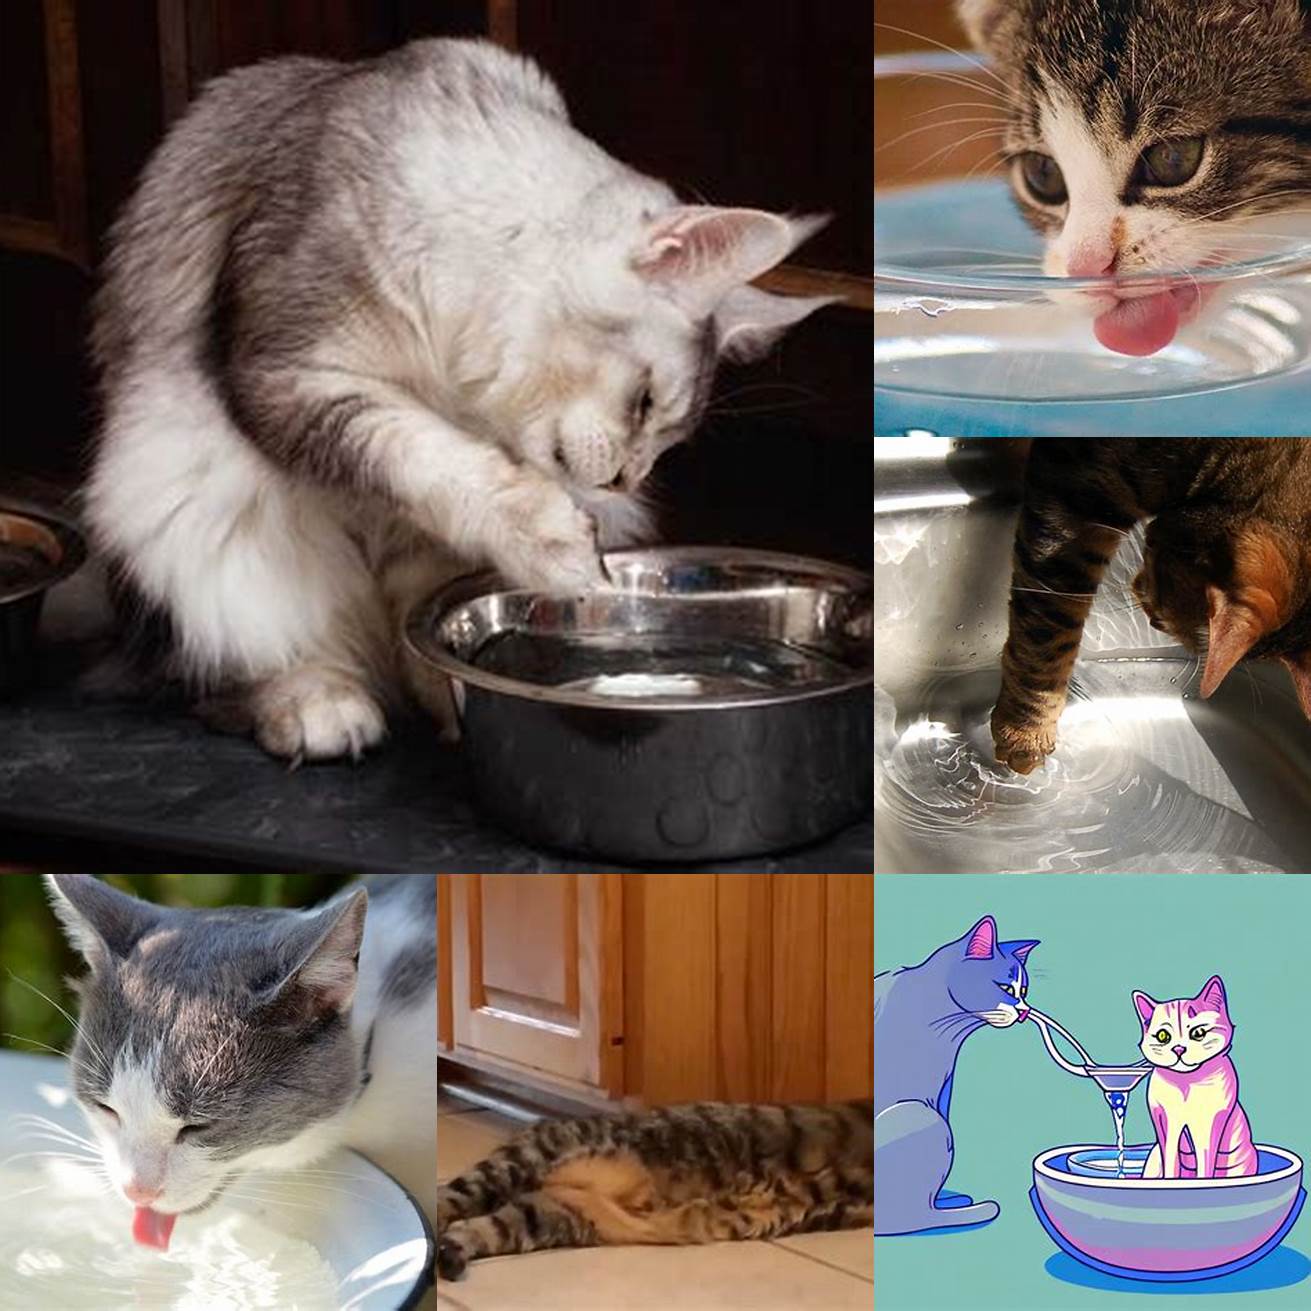 Cats use their paws to drink water because they are clean animals and prefer to test the temperature and depth of the water before drinking